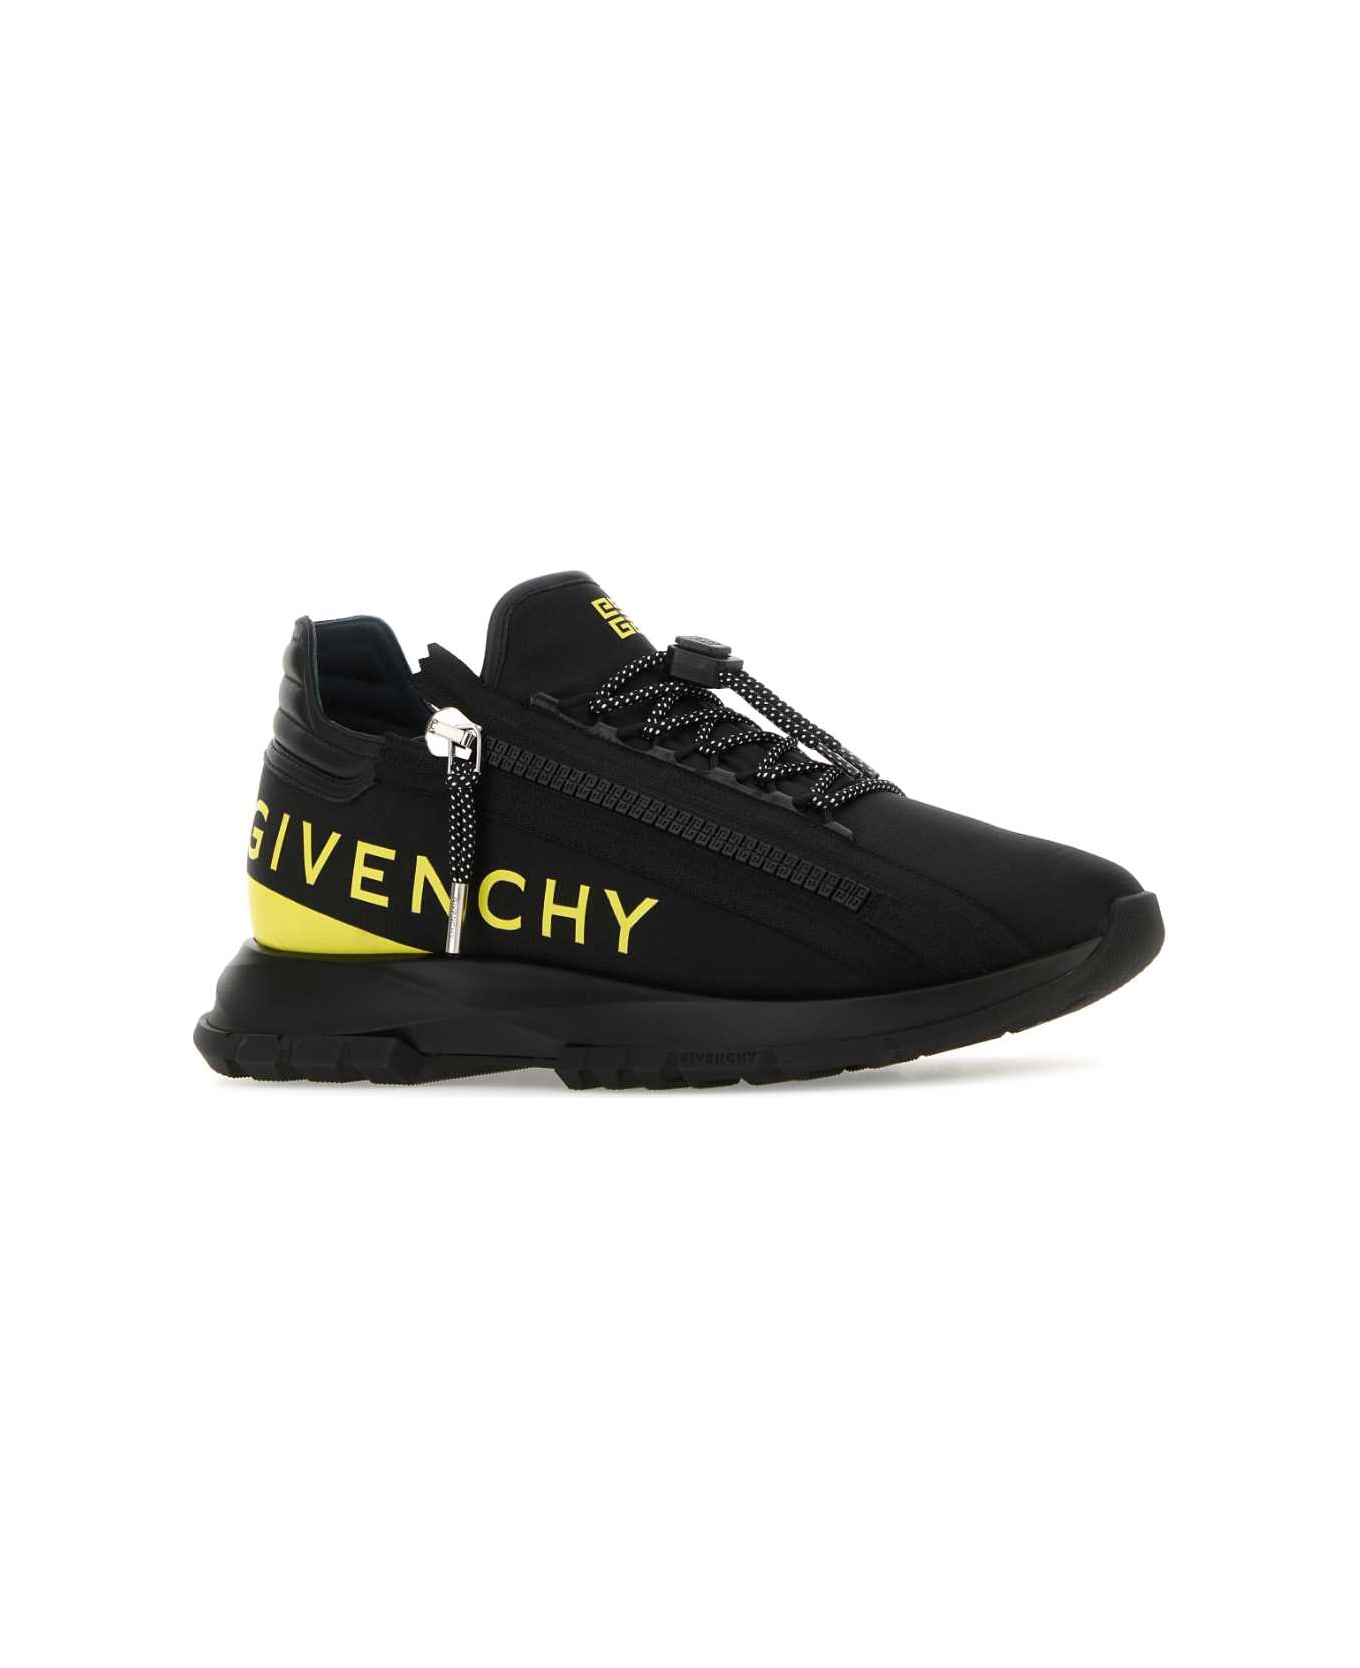 Givenchy Black Fabric Spectre Sneakers - BLACKYELLOW スニーカー